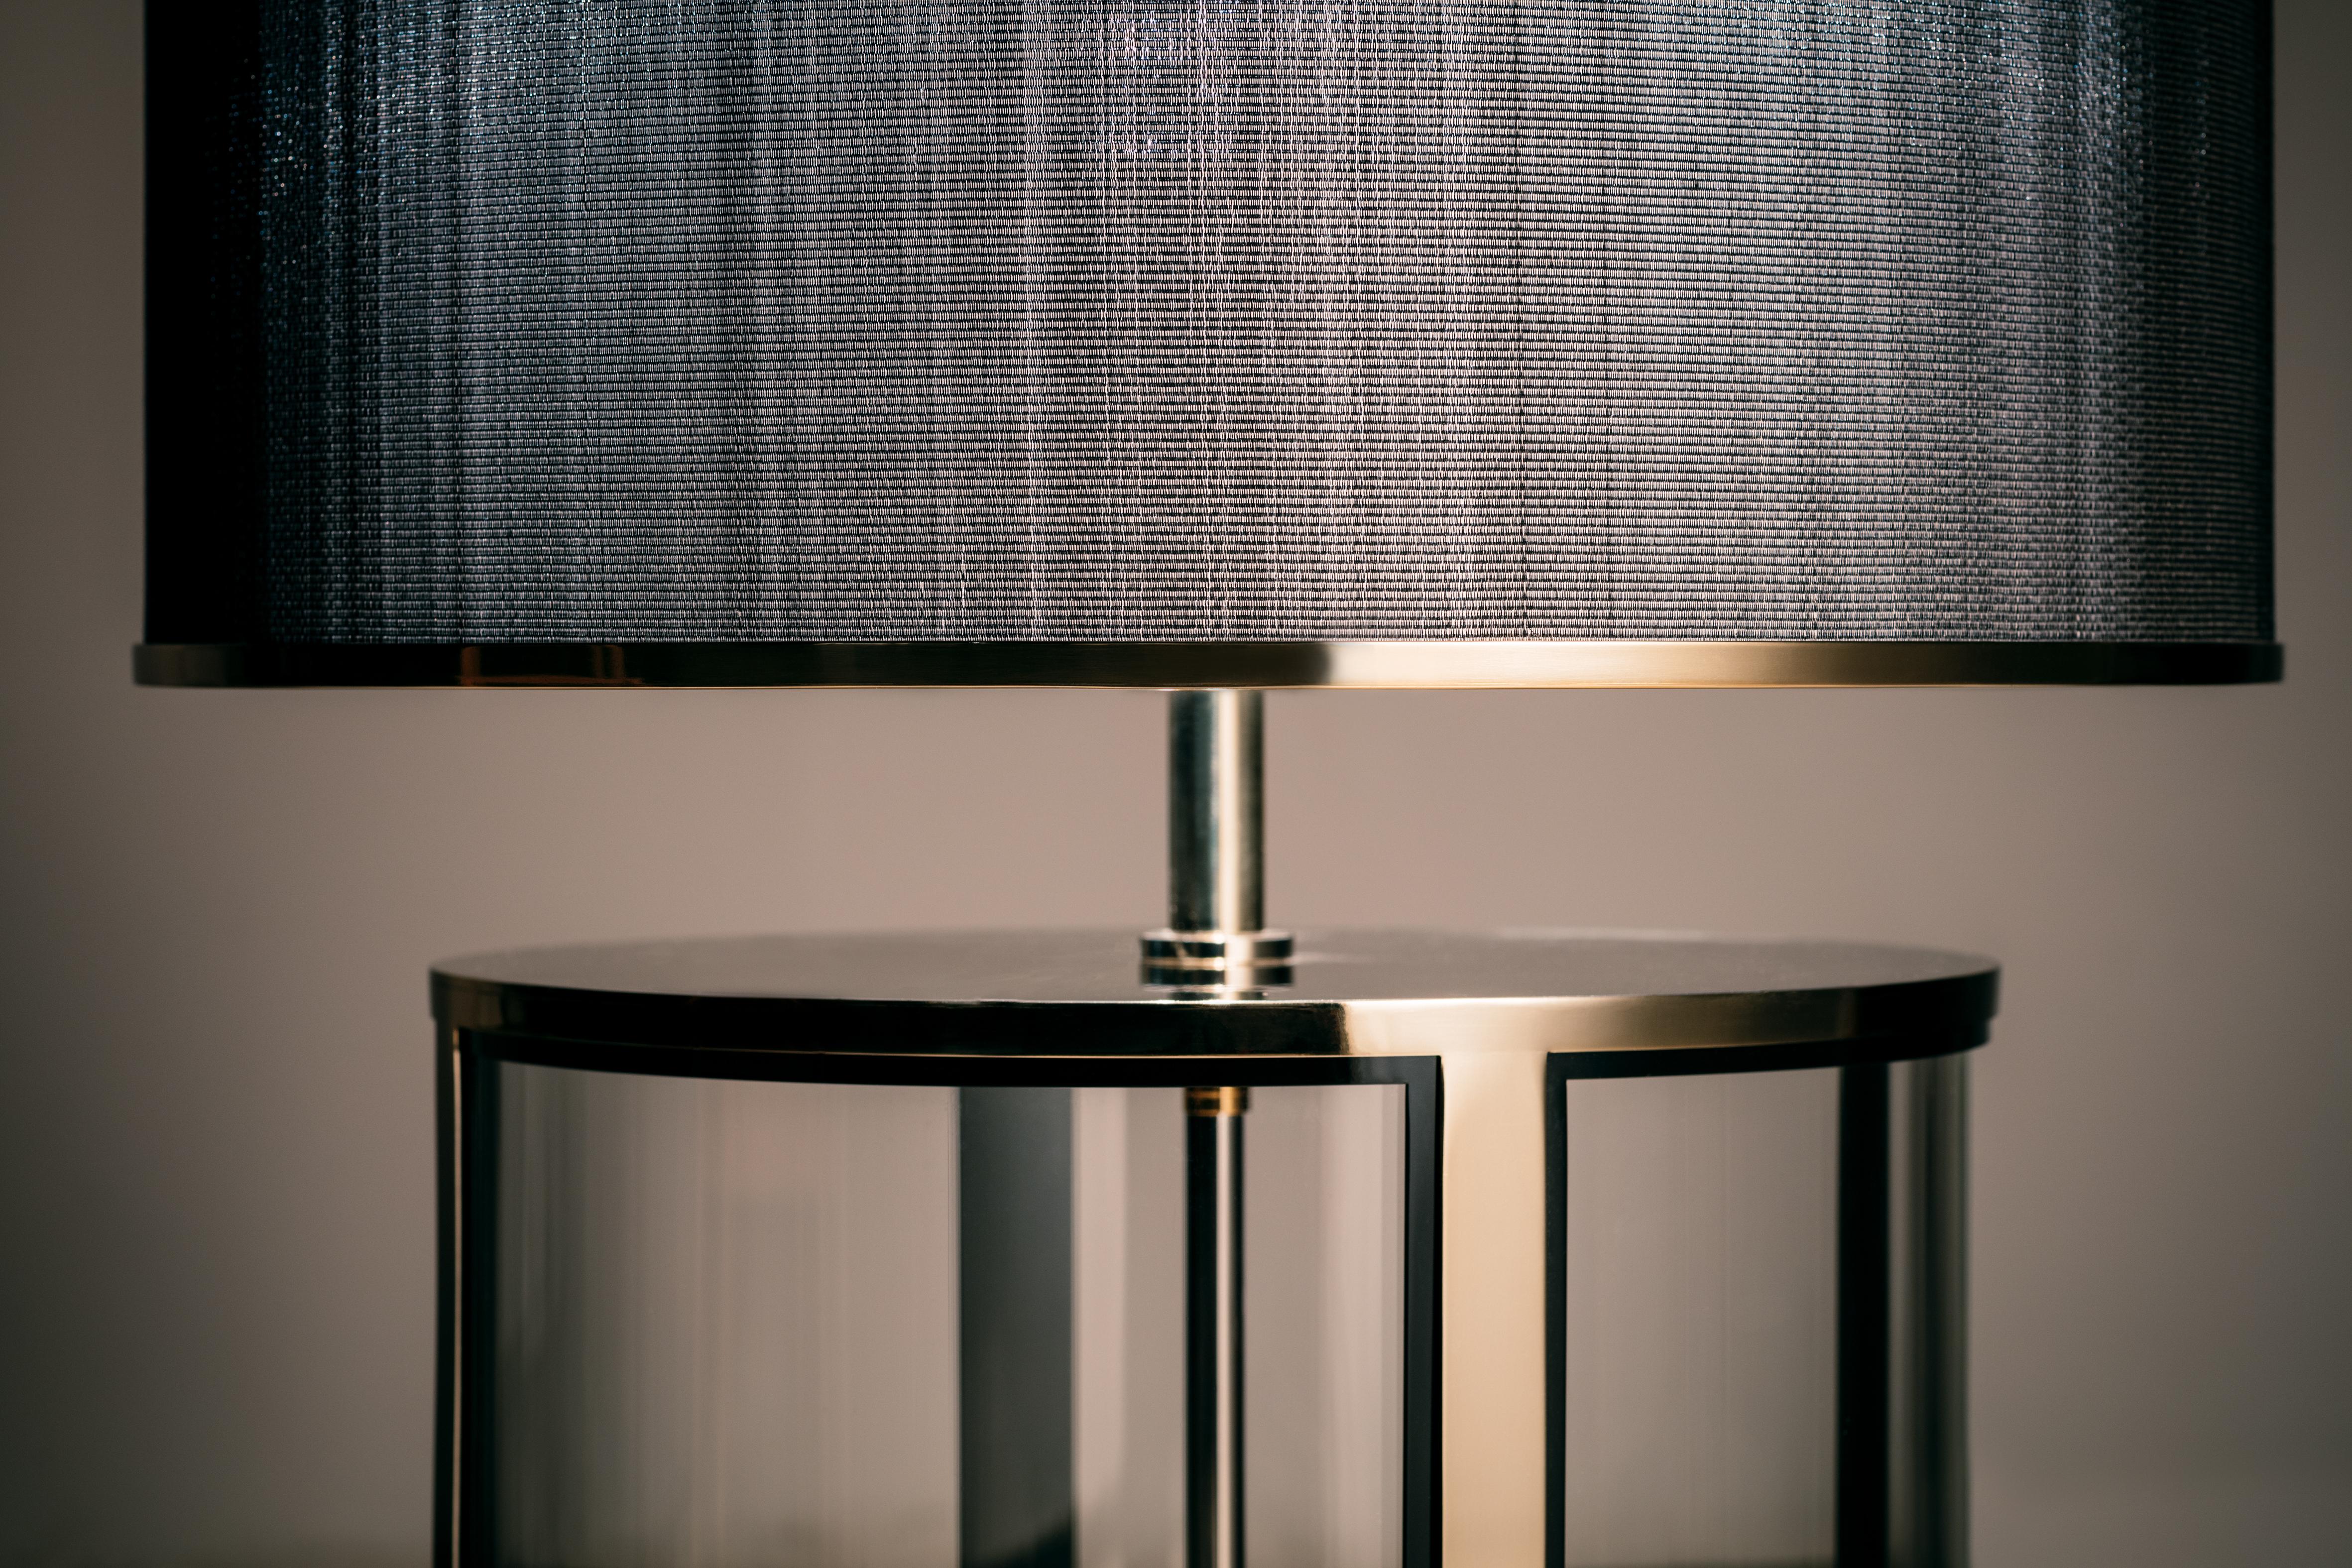 A table lamp of generous proportion yet seamless transparency. The interior is exposed to allow visibility through the base of the lamp. The curved glass acts as a lens, slightly distorting the moving landscape beyond. There is a strong contrast